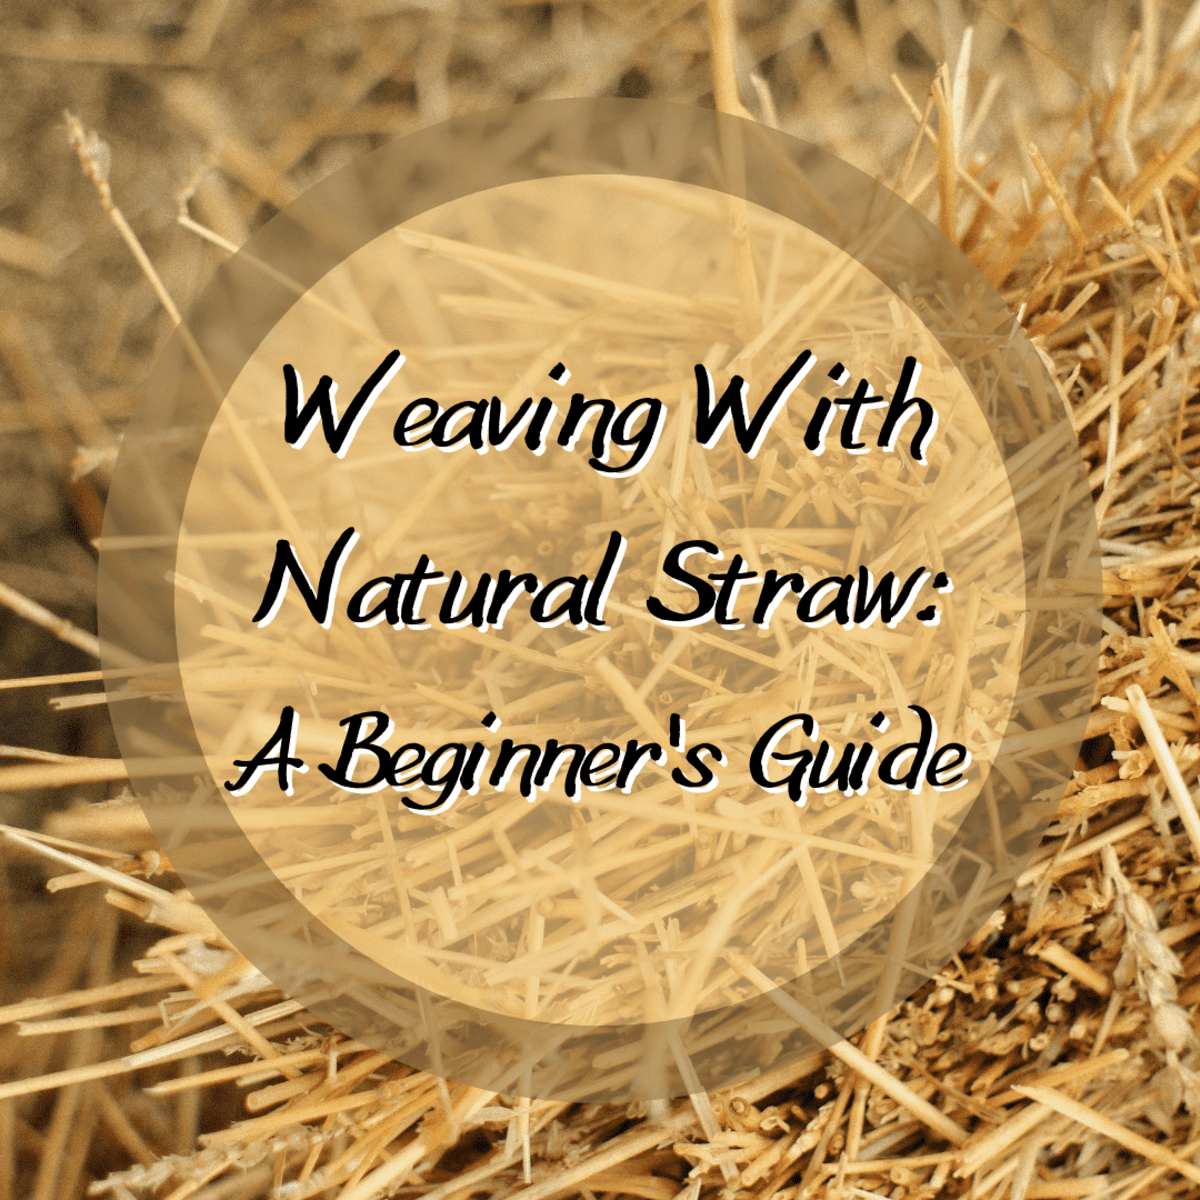 https://images.saymedia-content.com/.image/ar_1:1%2Cc_fill%2Ccs_srgb%2Cq_auto:eco%2Cw_1200/MTgzOTY5NDI0OTU1NDE4NTA5/weaving-with-straw-basic-beginners-guide-patterns-to-practice-with.png